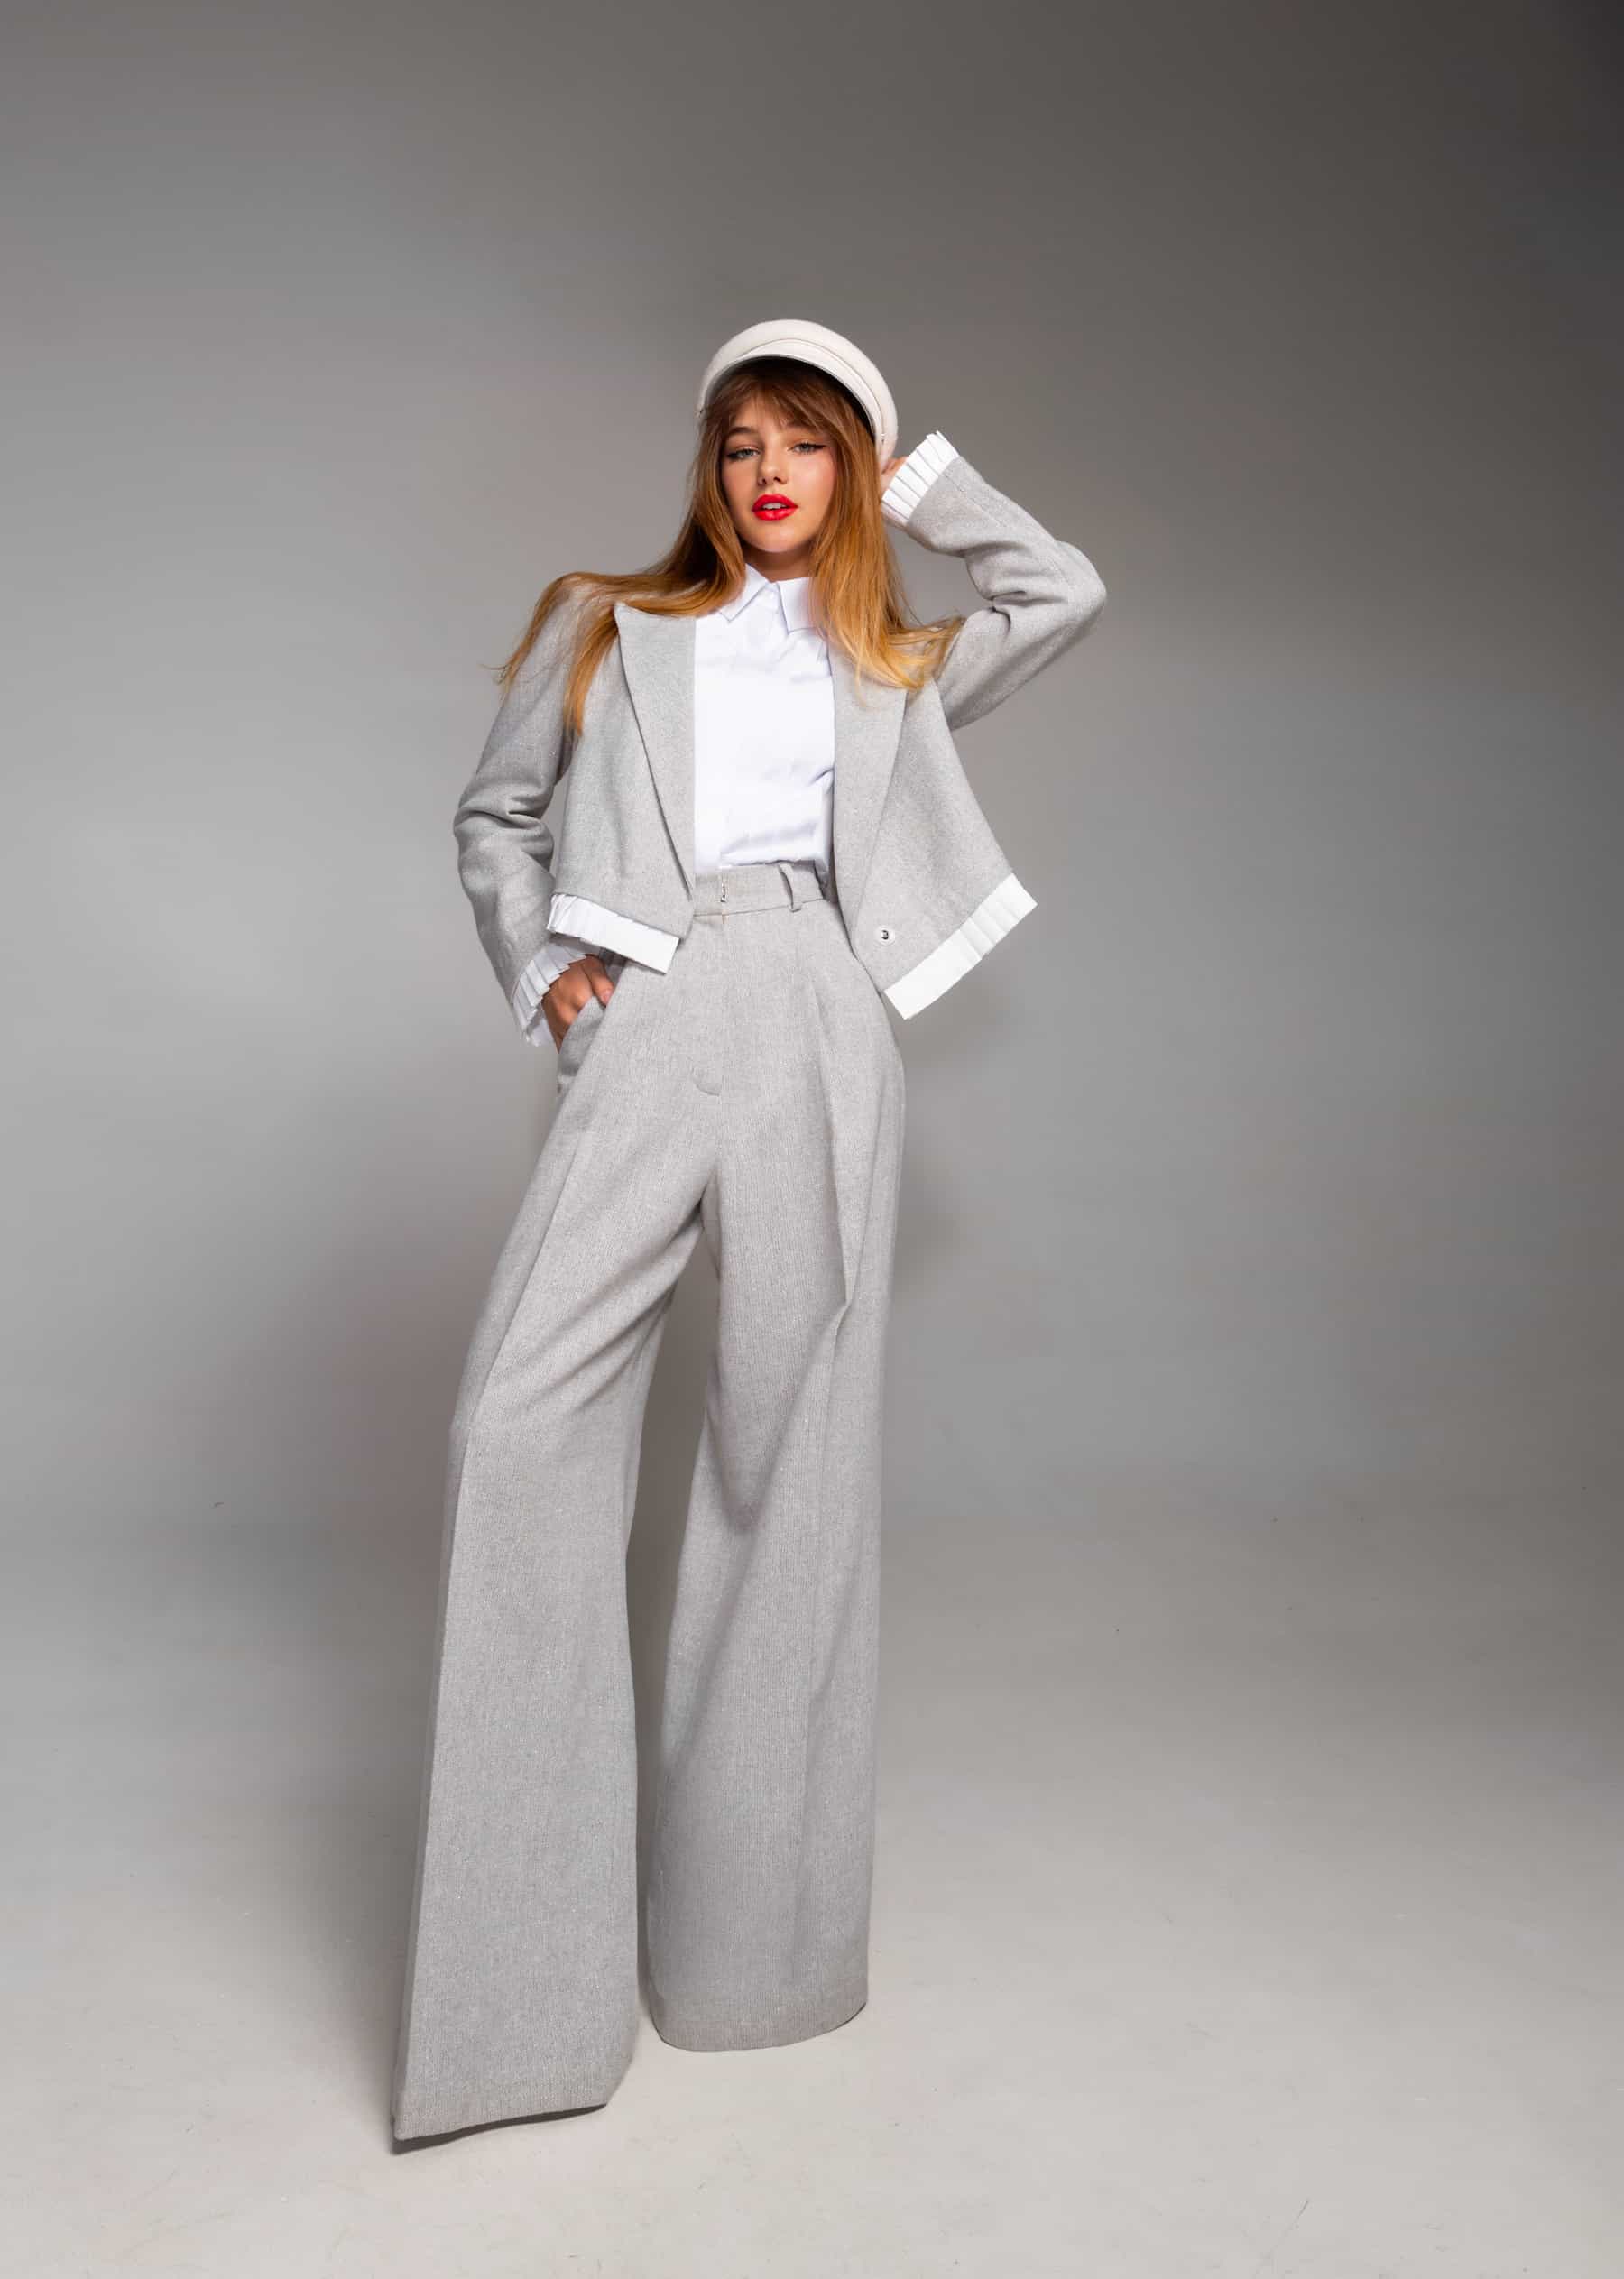 Tweed suit (cropped jacket and loose-fitting trousers) with cotton trim